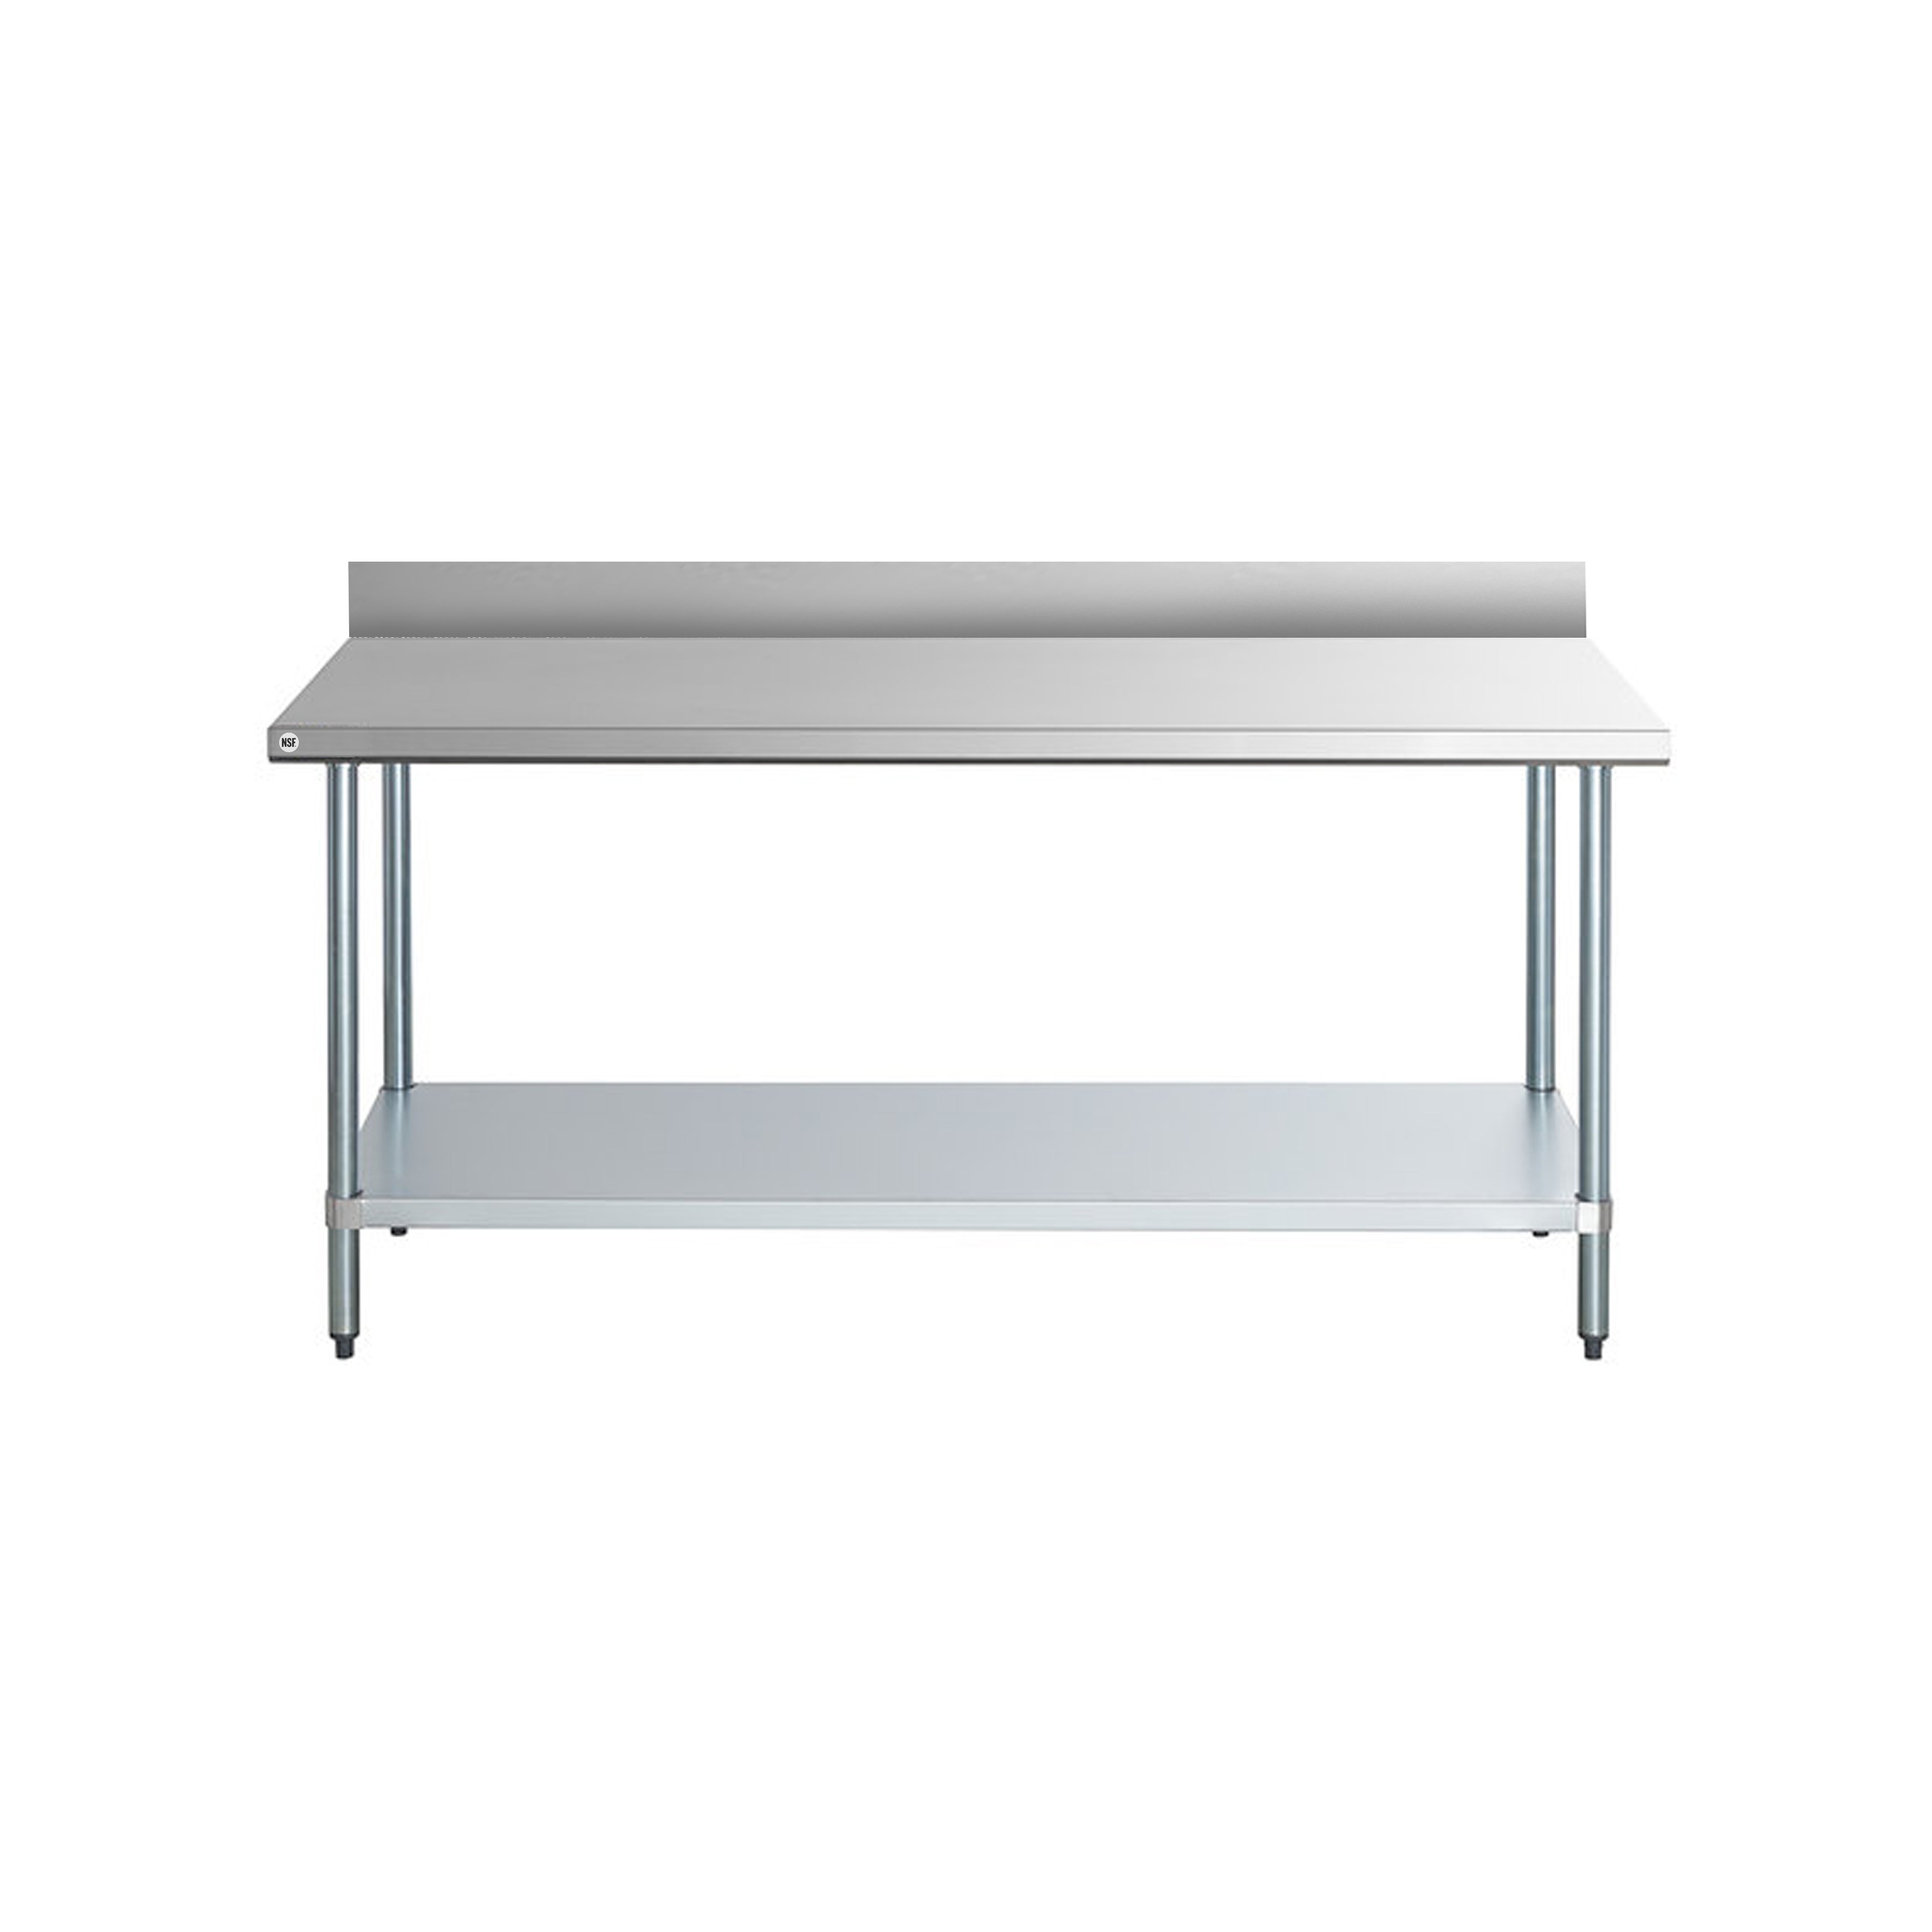 Omcan - 23793, Commercial 24" x 24" Stainless Steel Kitchen Work Table with 4" BackSplash 700lbs Medium Duty